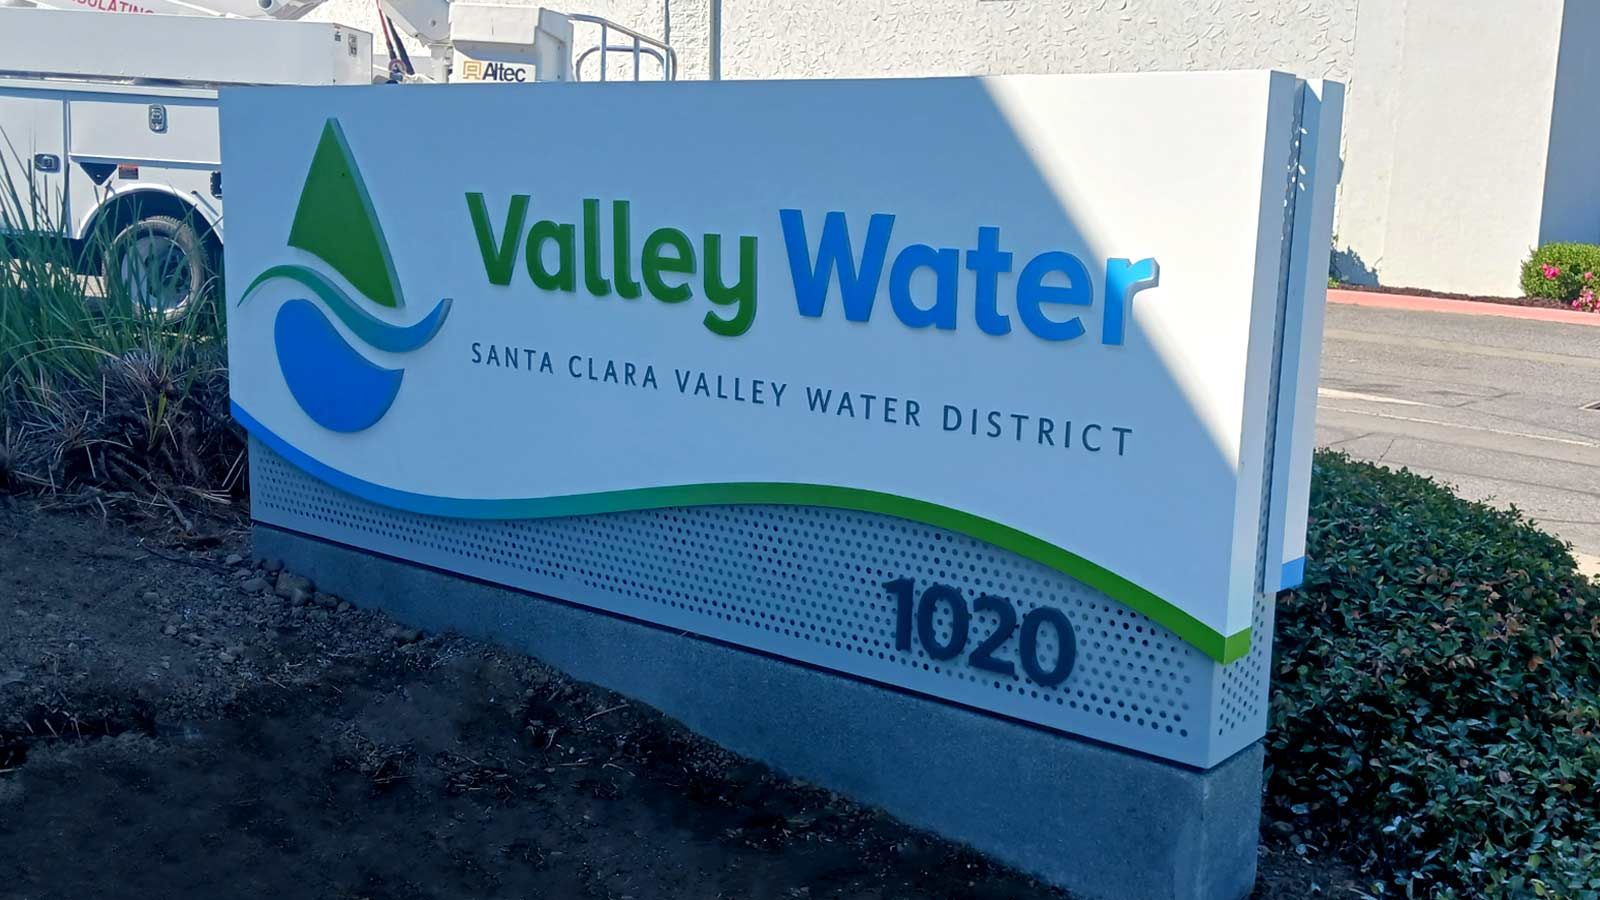 Valley Water outdoor sign installed by the road